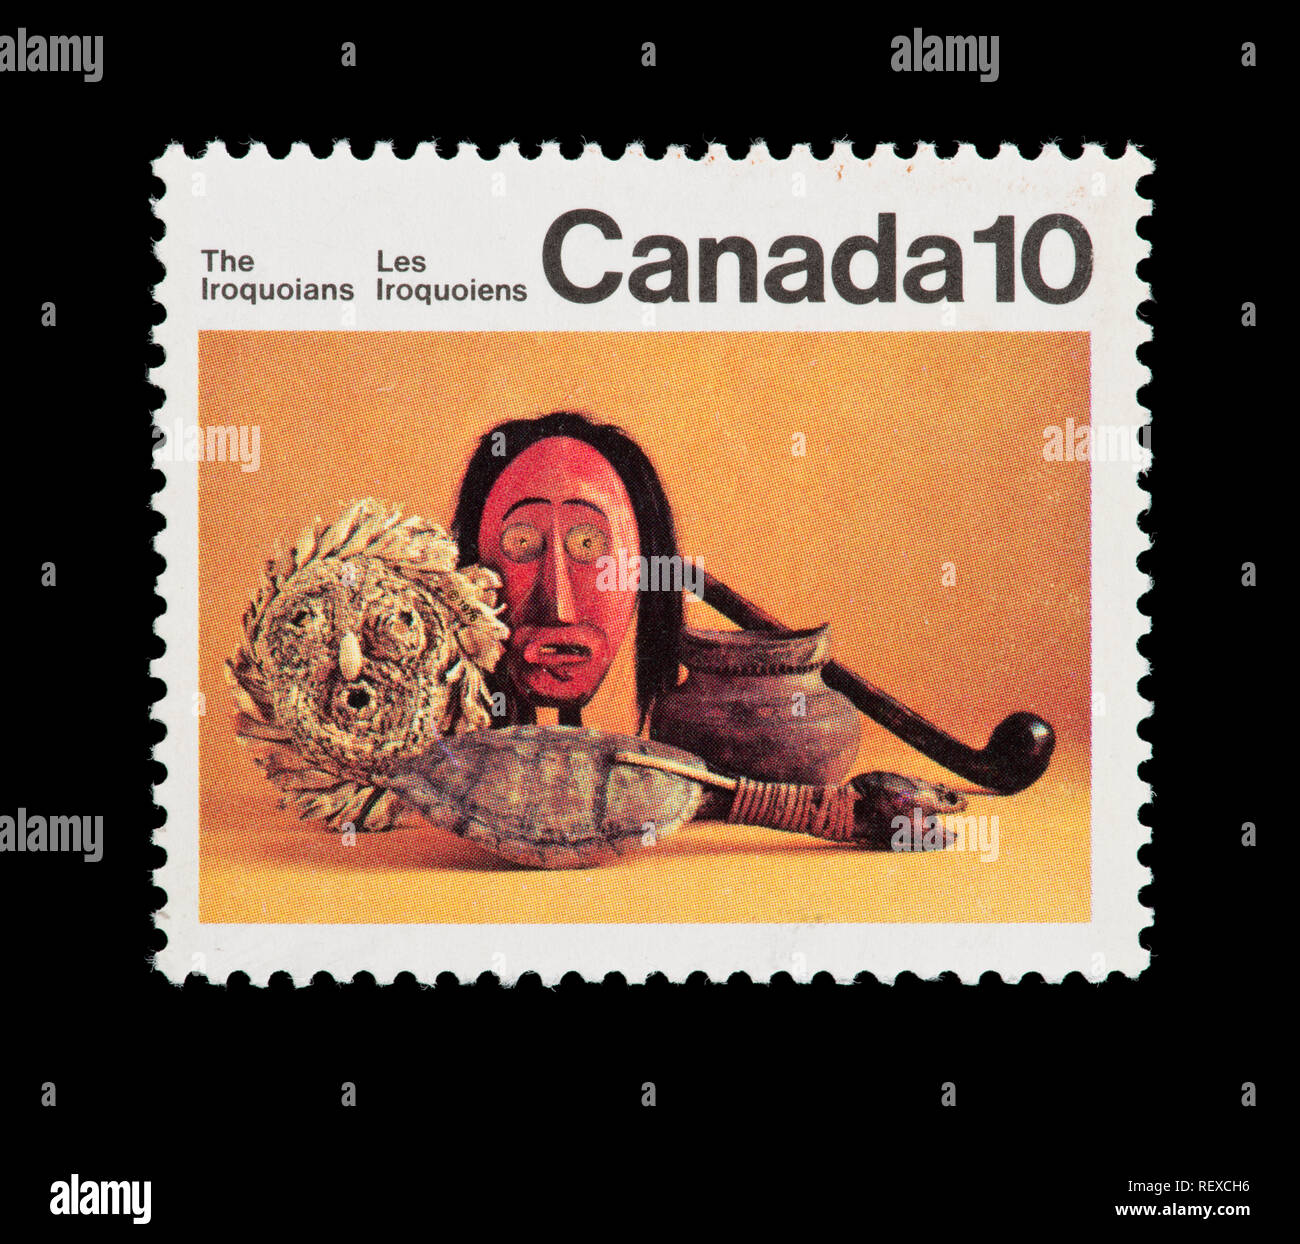 Postage stamp from Canada depicting a cornhusk mask and native artifacts. Stock Photo